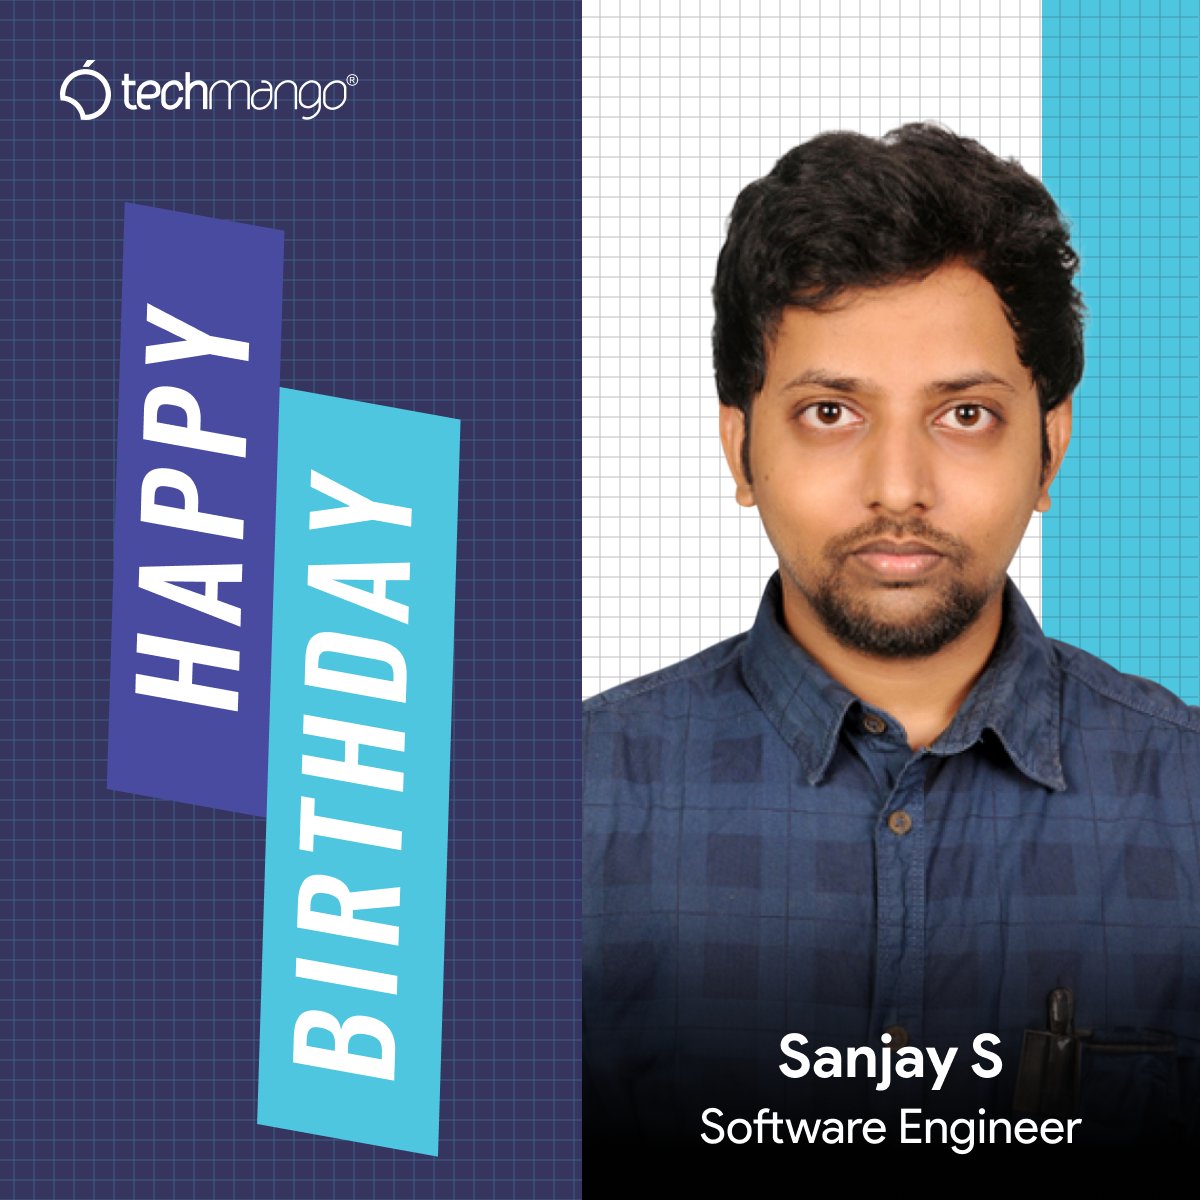 Techmango Wishes Happy Birthday to Sanjay Cheers to another fantastic year ahead! May this birthday be the start of your greatest, most wonderful journey yet. Have a fantastic day! #happybirthday #birthdaywishes #birthdaycelebration #techmango